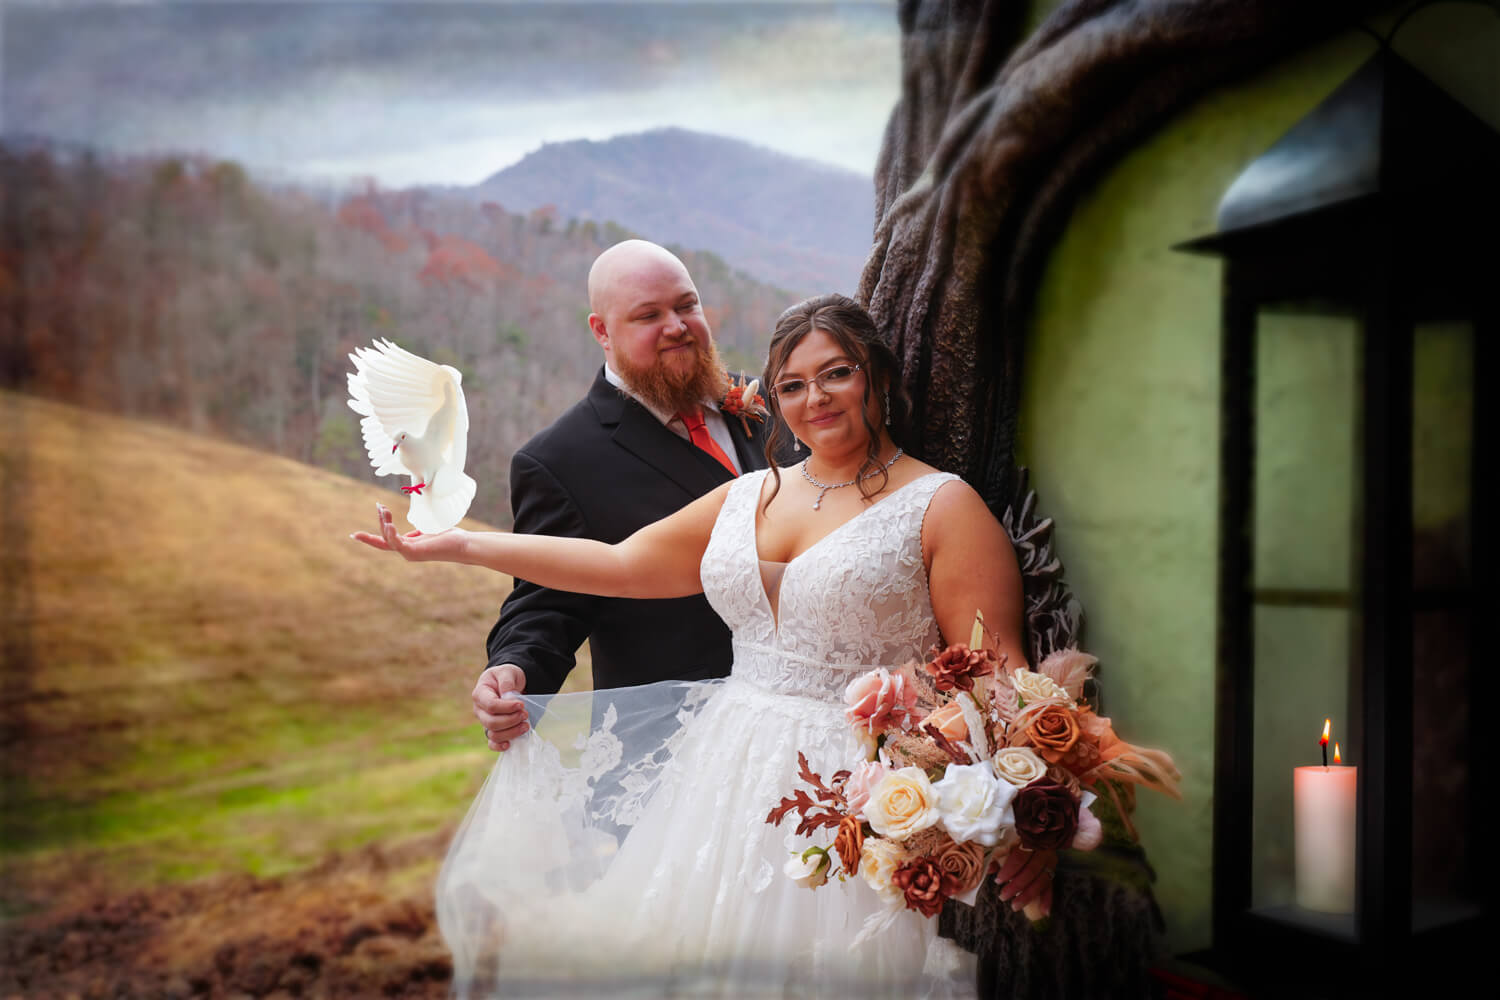 Fantasy image of wedding couple at a fairy house in the mountains with a candle burning by the door and a white dove flying into her hand